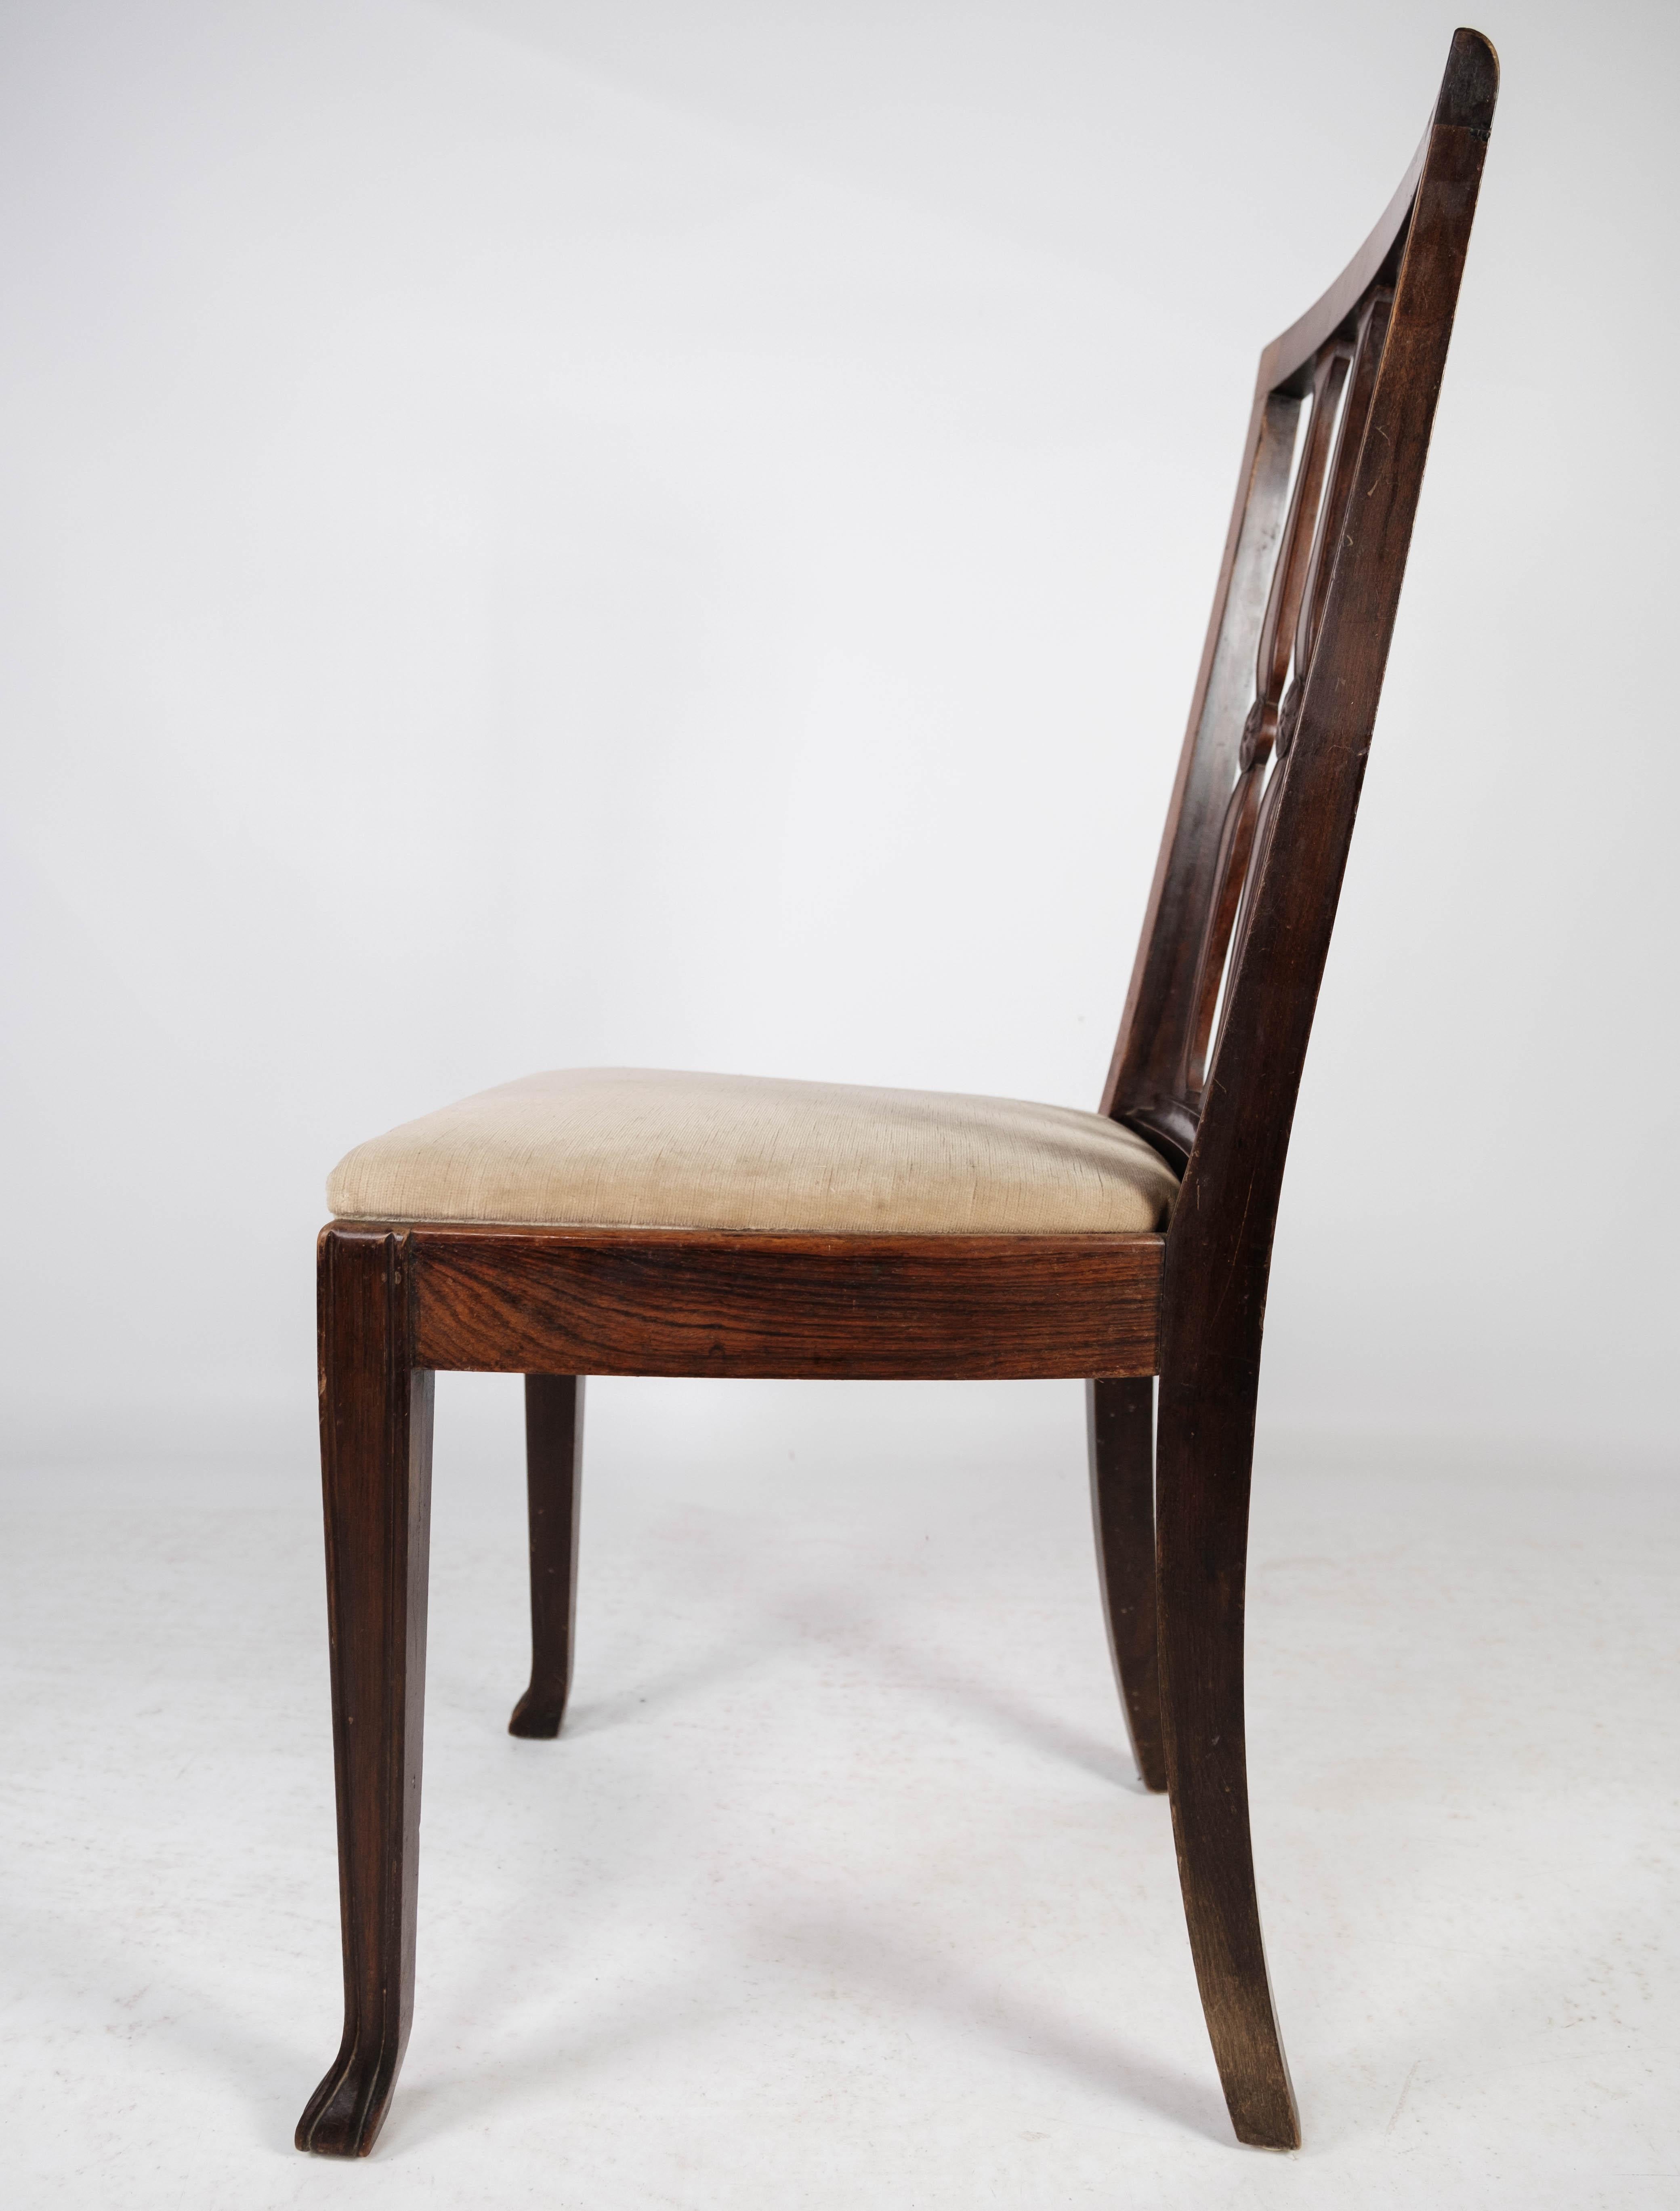 Set of Four Dining Room Chairs in Rosewood, 1920s For Sale 2